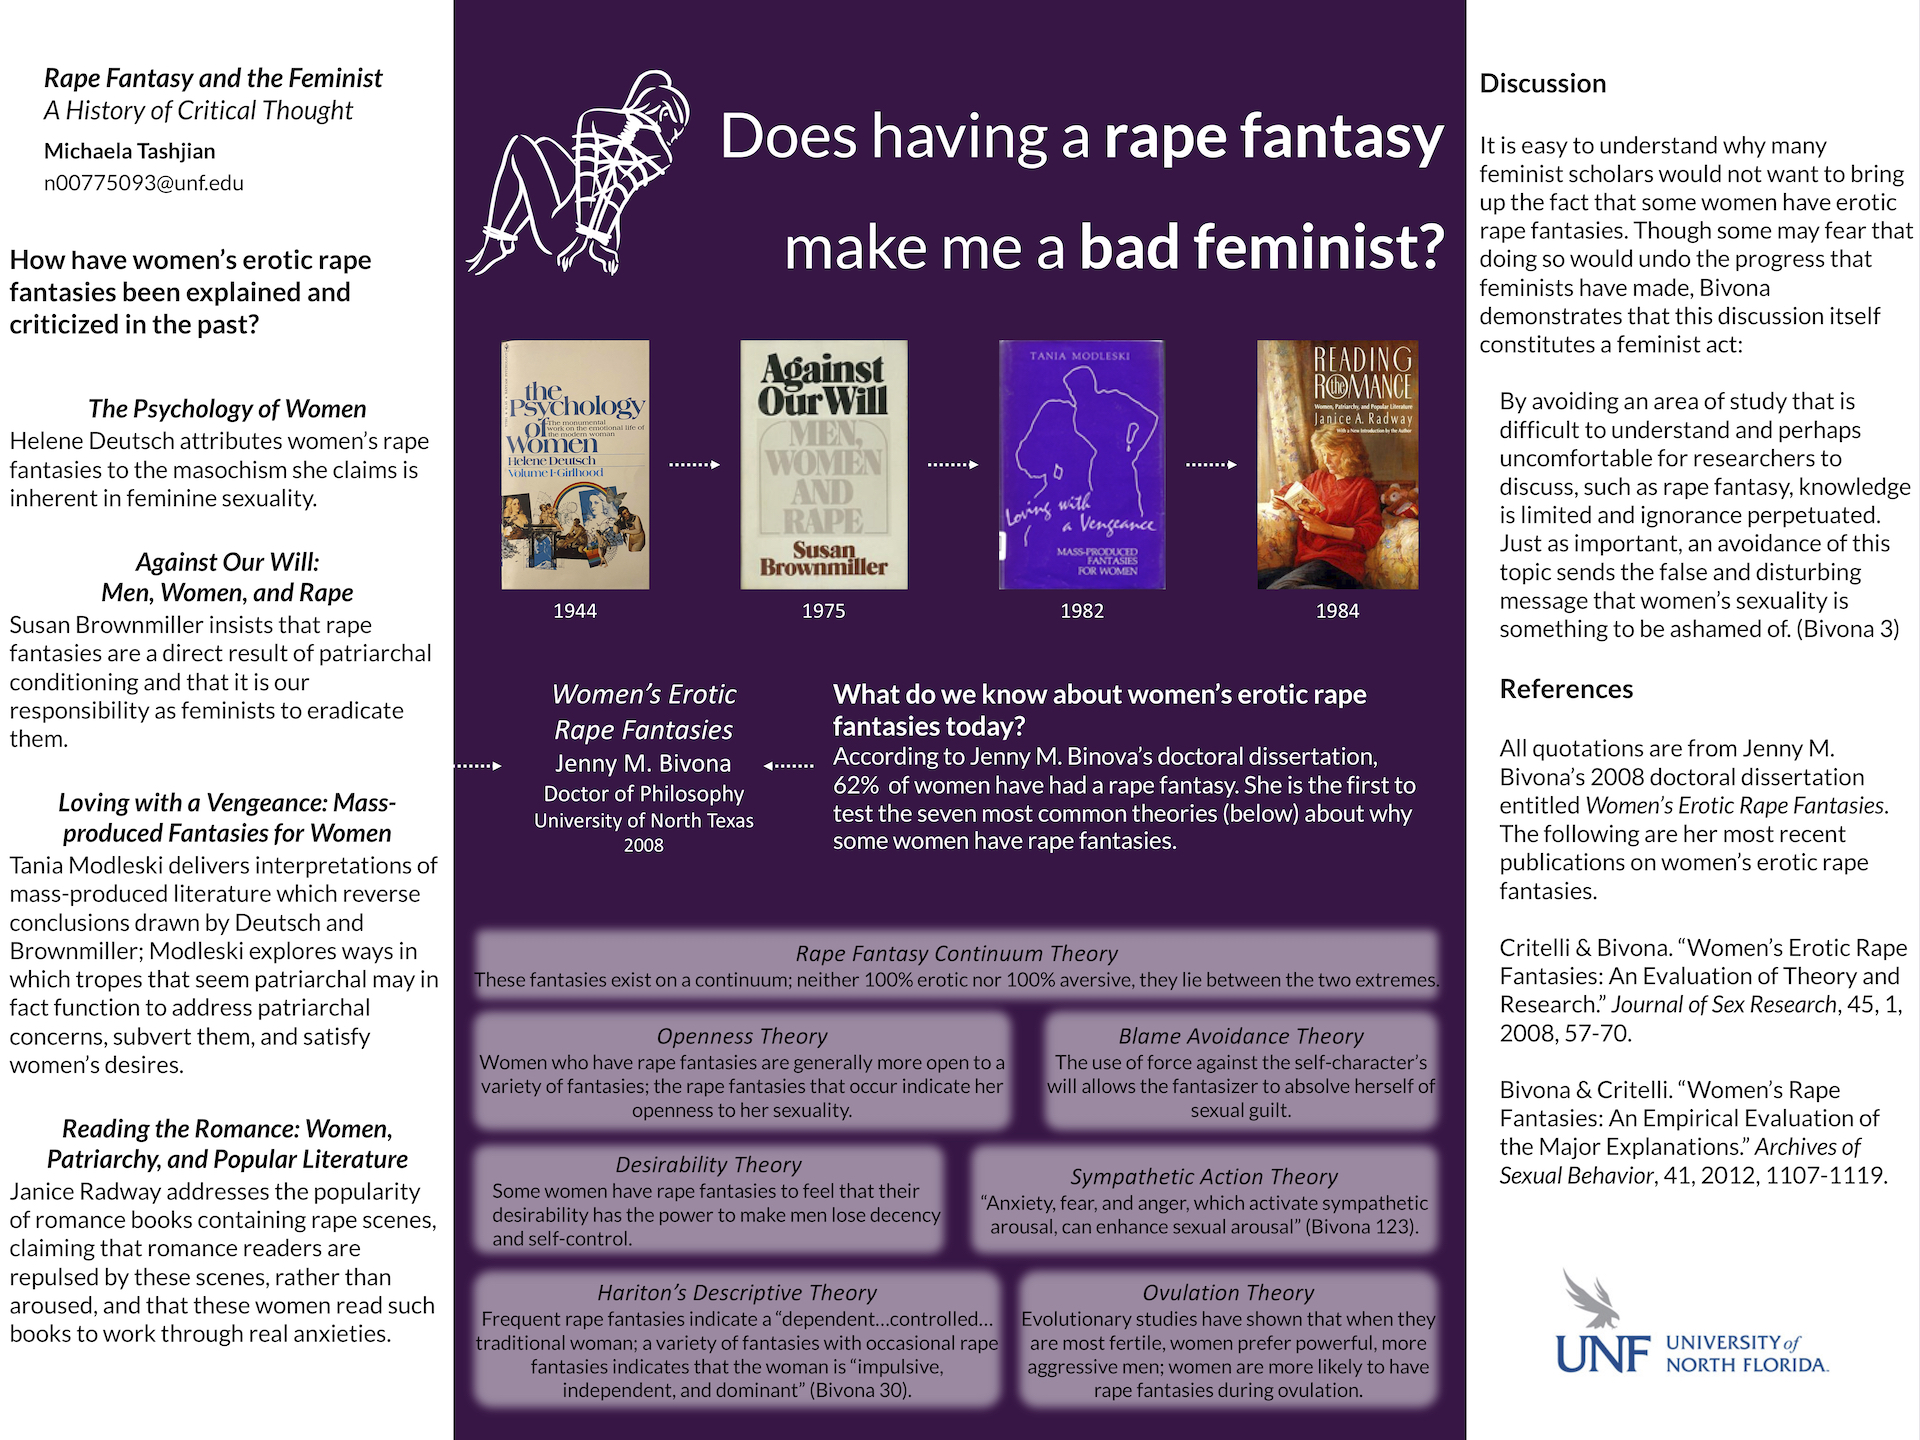 Rape Fantasy and the Feminist A History of Critical Thought photo